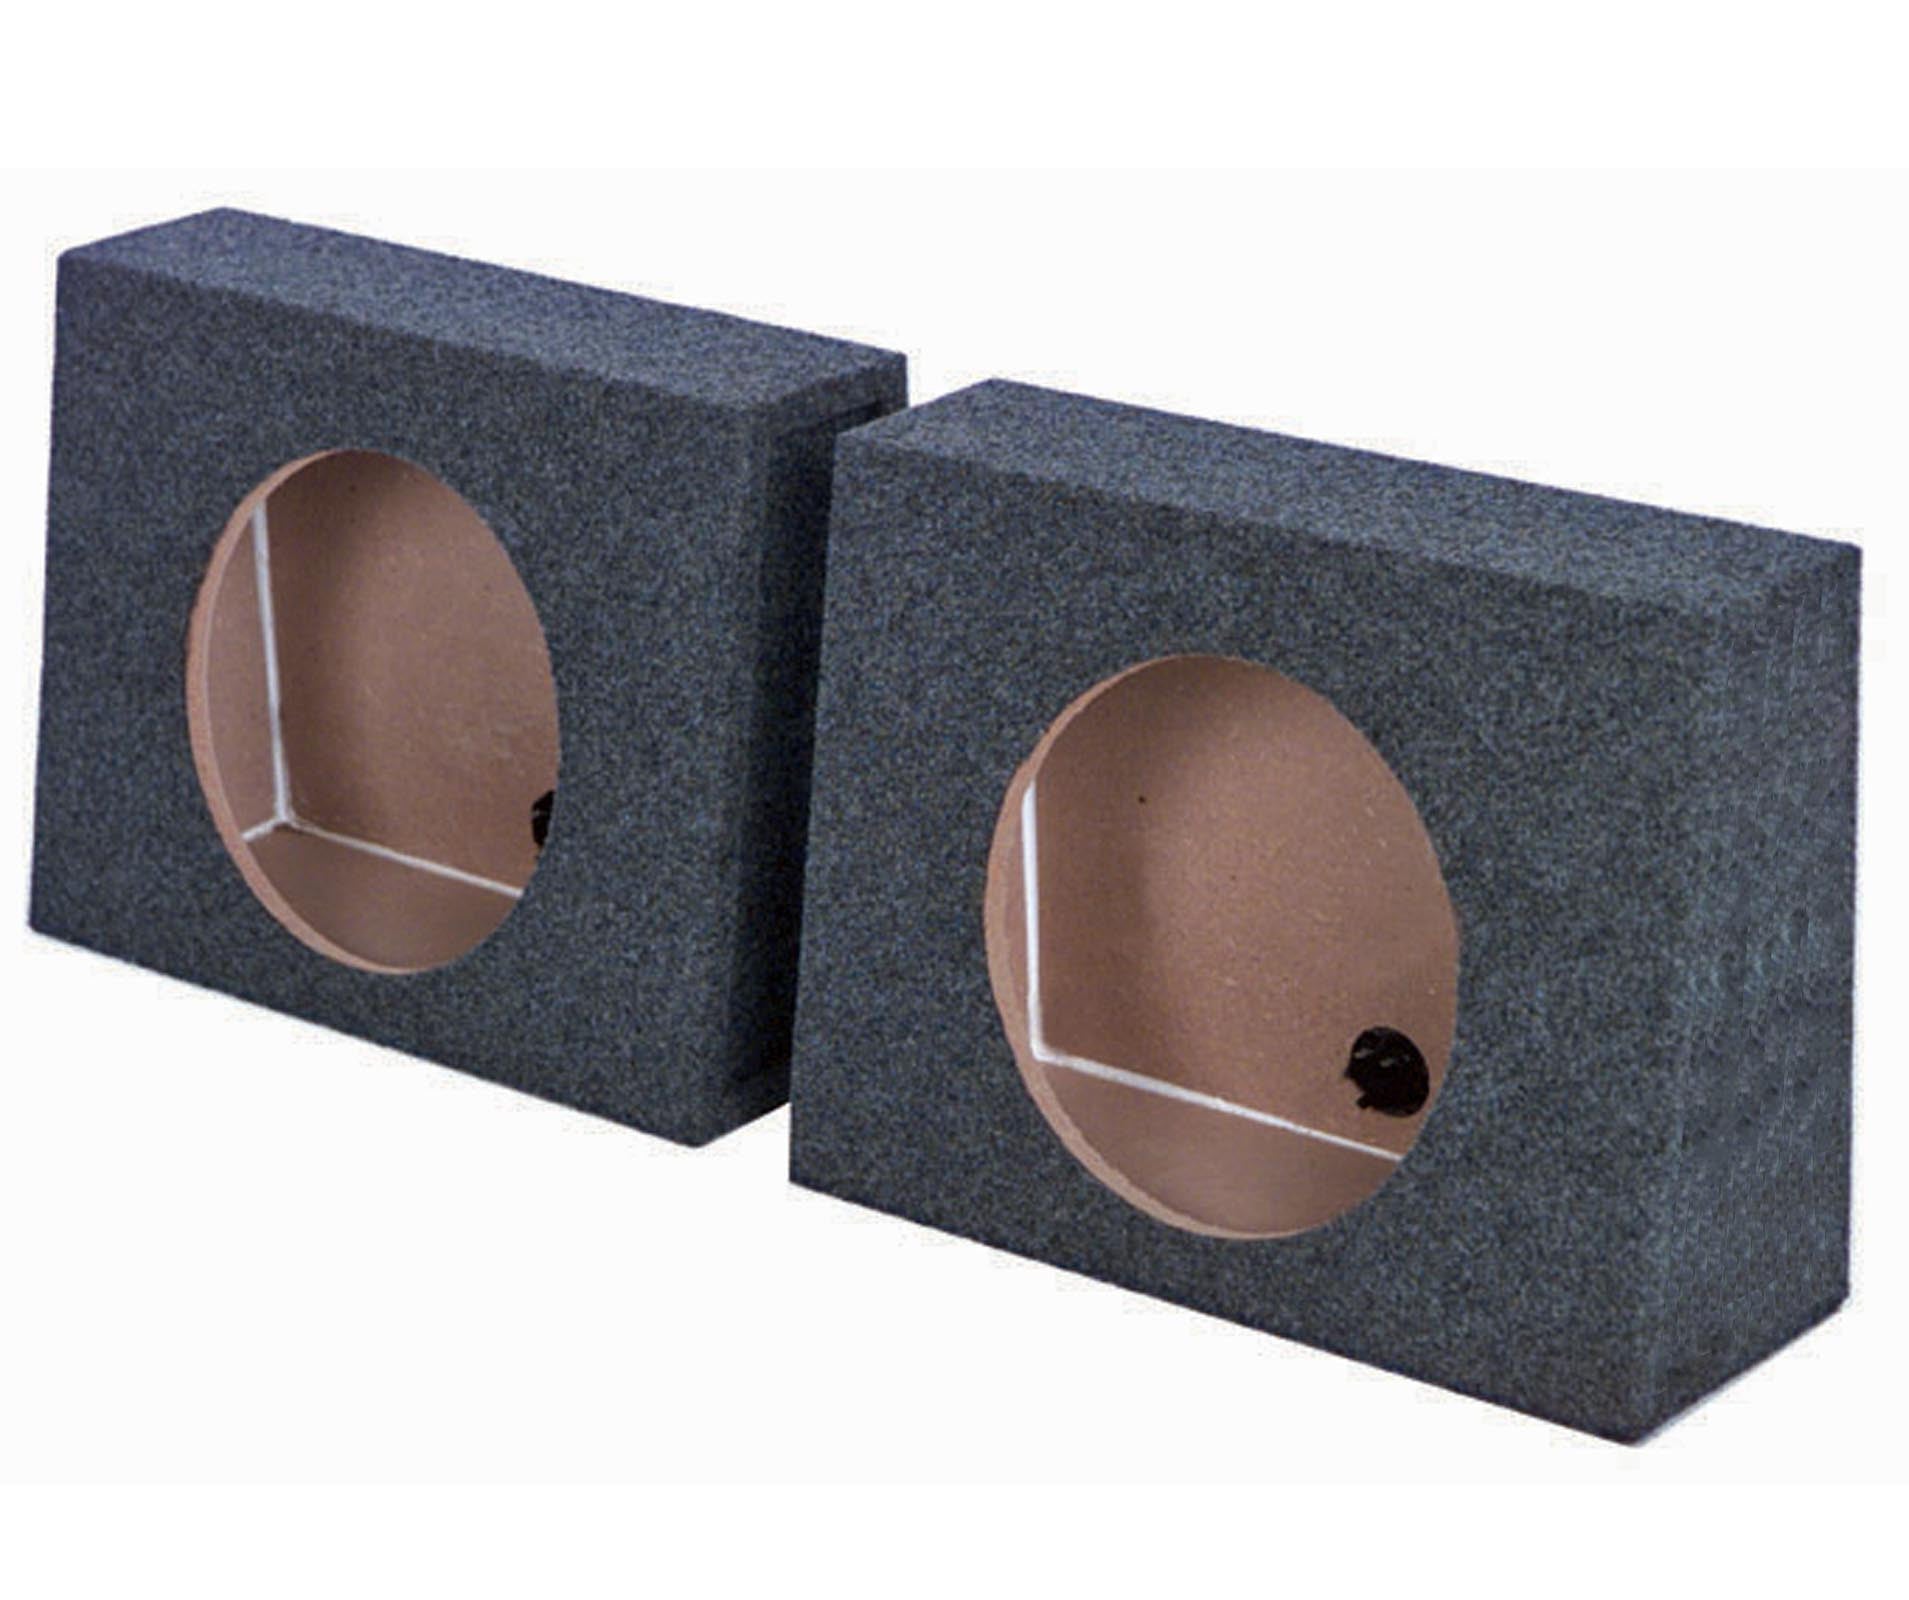 QPower TW12 Split Angle Twin 12" Subwoofer Boxes